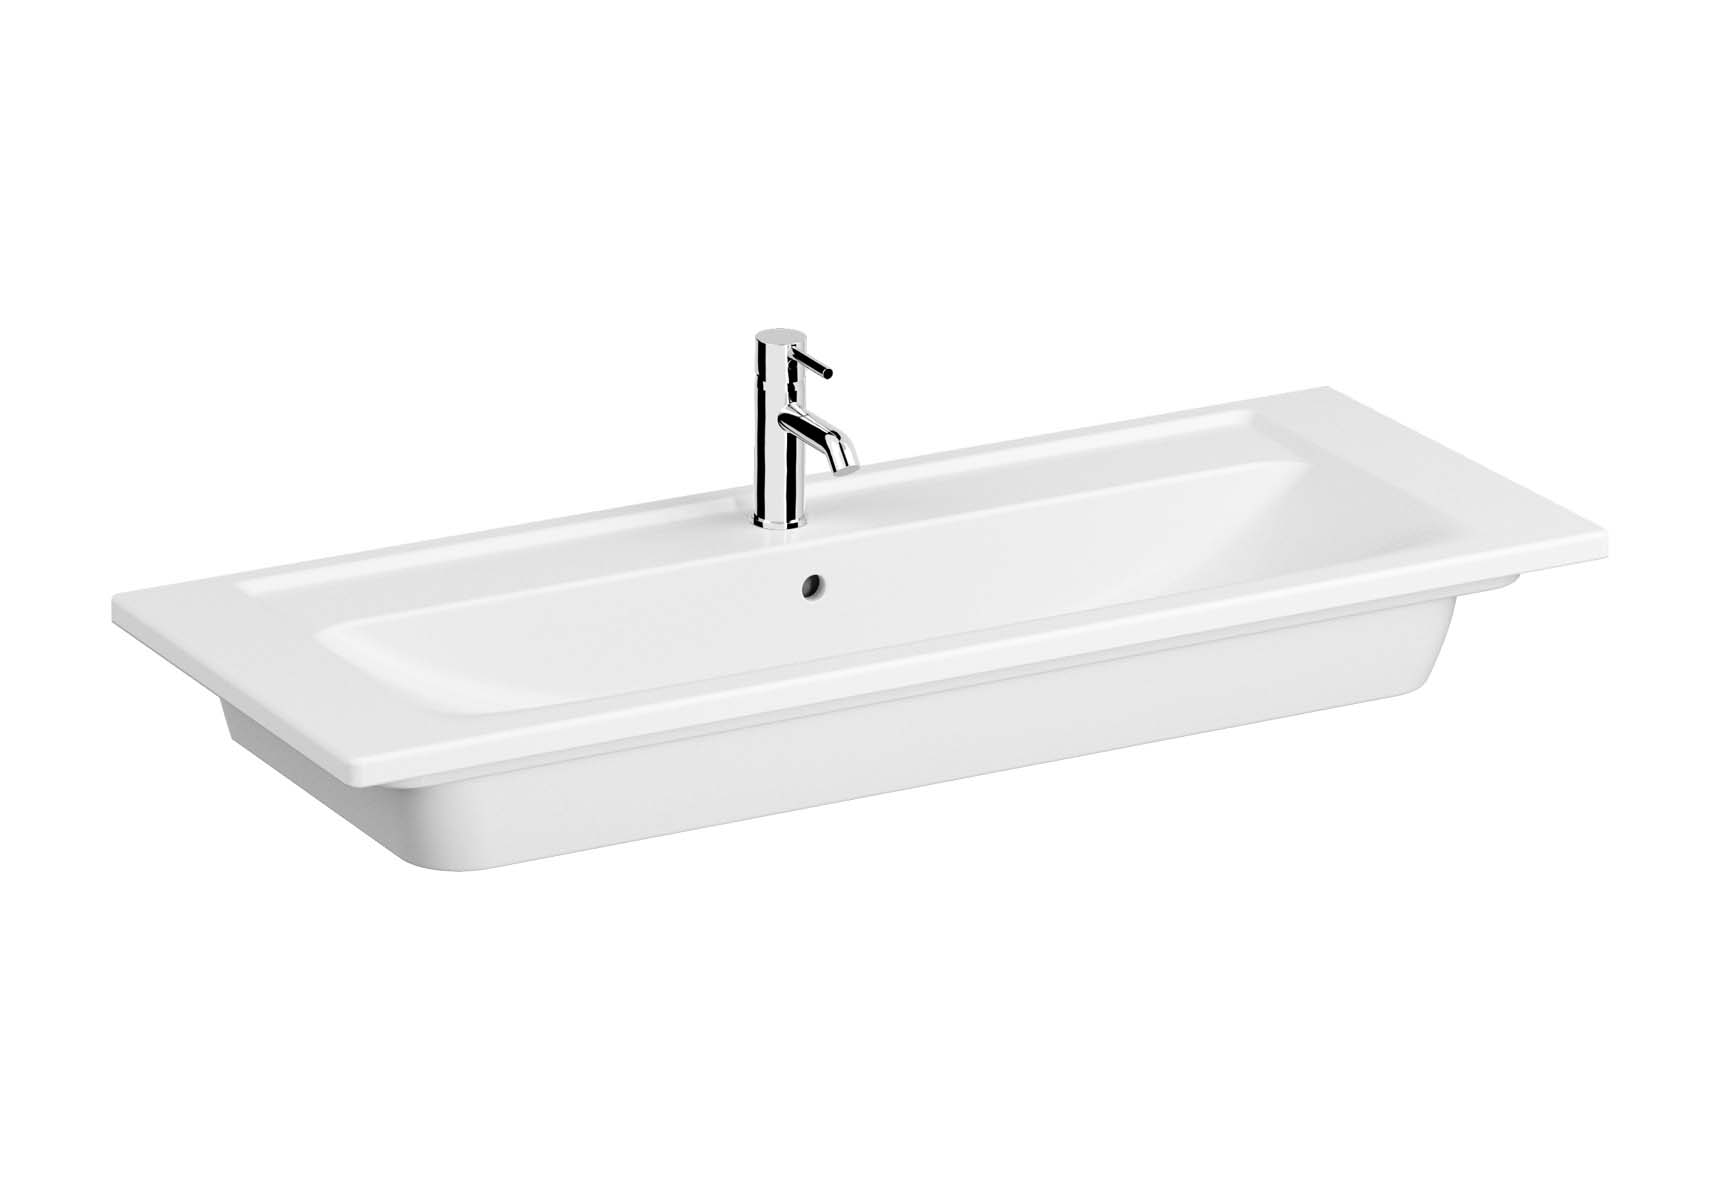 Vanity Basin, 120 cm, Two Tap Holes, With Overflow Hole